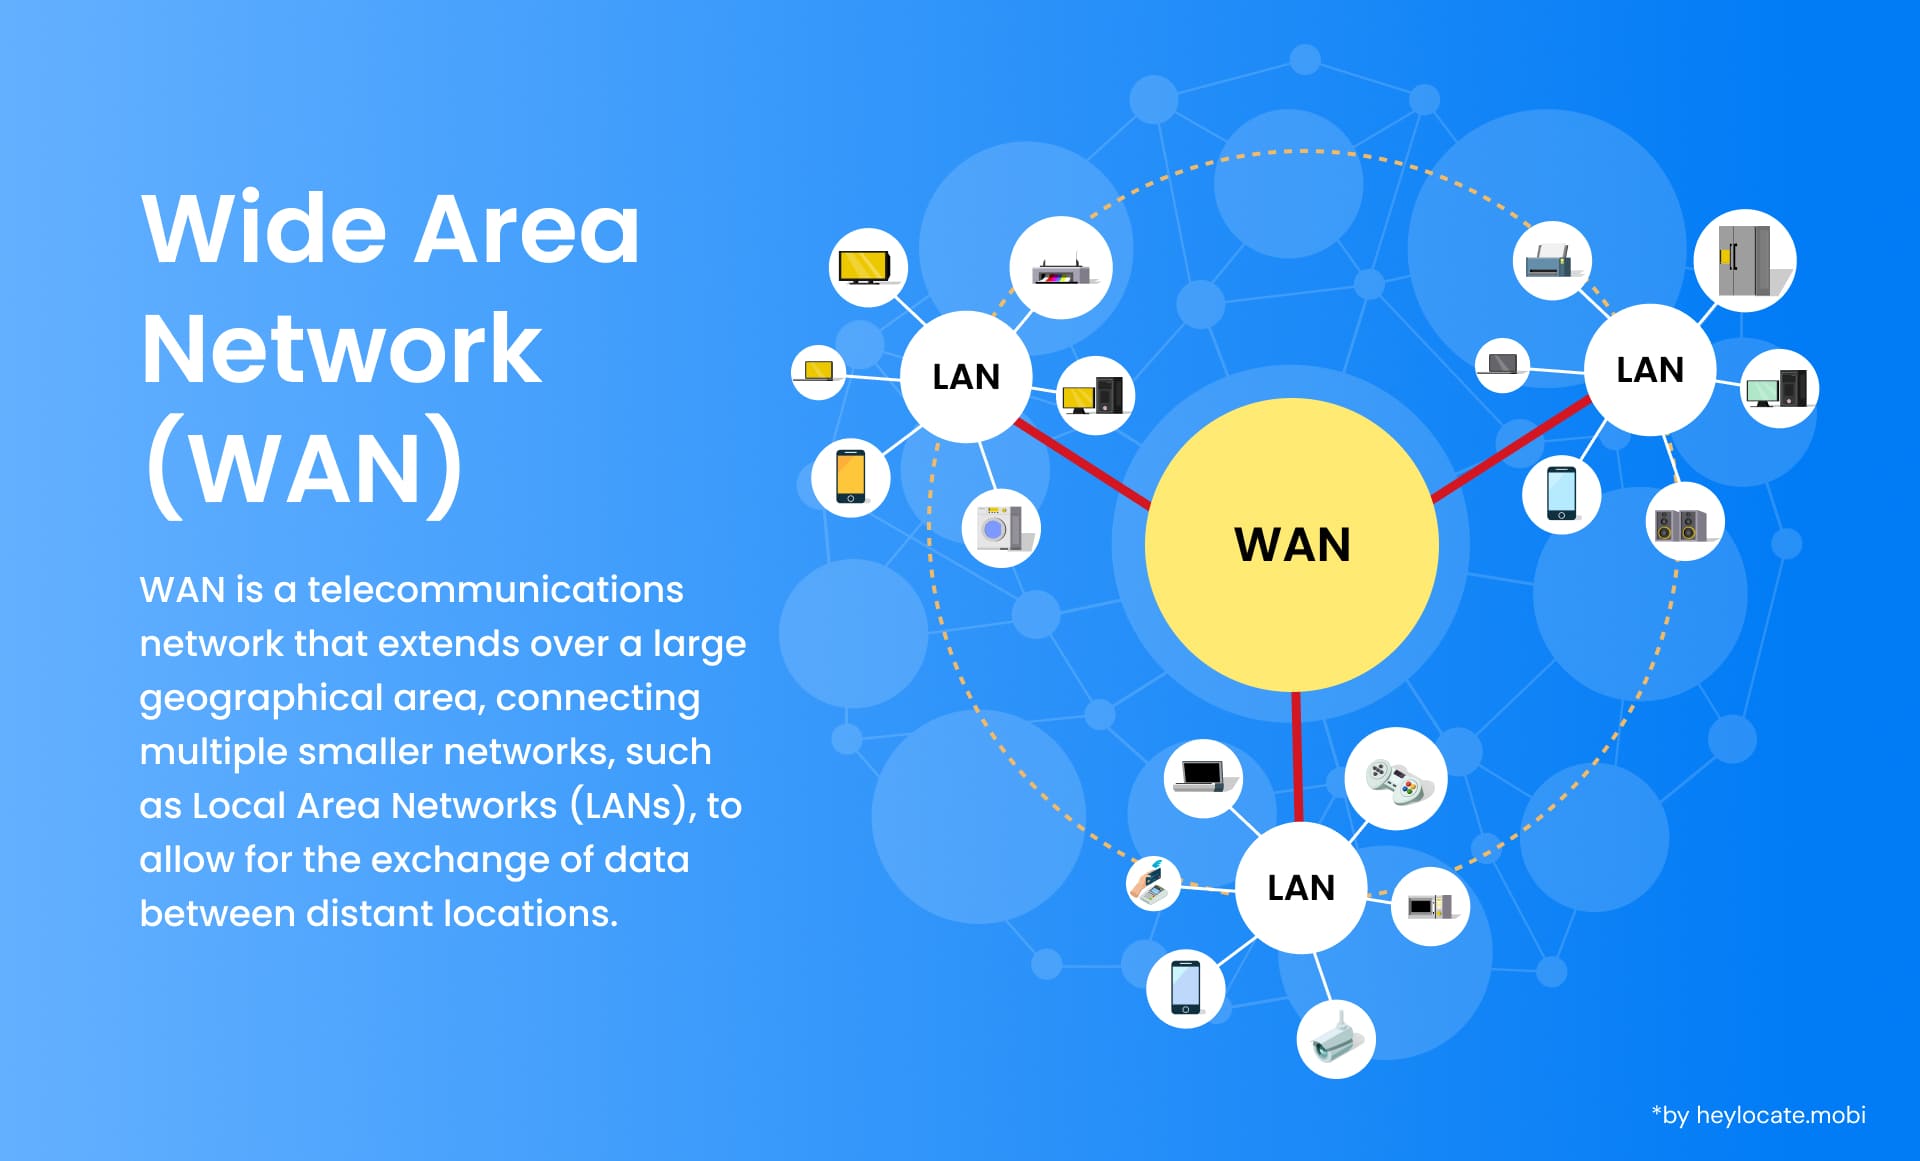 This visual represents a Wide Area Network (WAN), highlighting how it connects several smaller networks, such as Local Area Networks (LANs), over a vast geographical area to facilitate data exchange between distant locations.